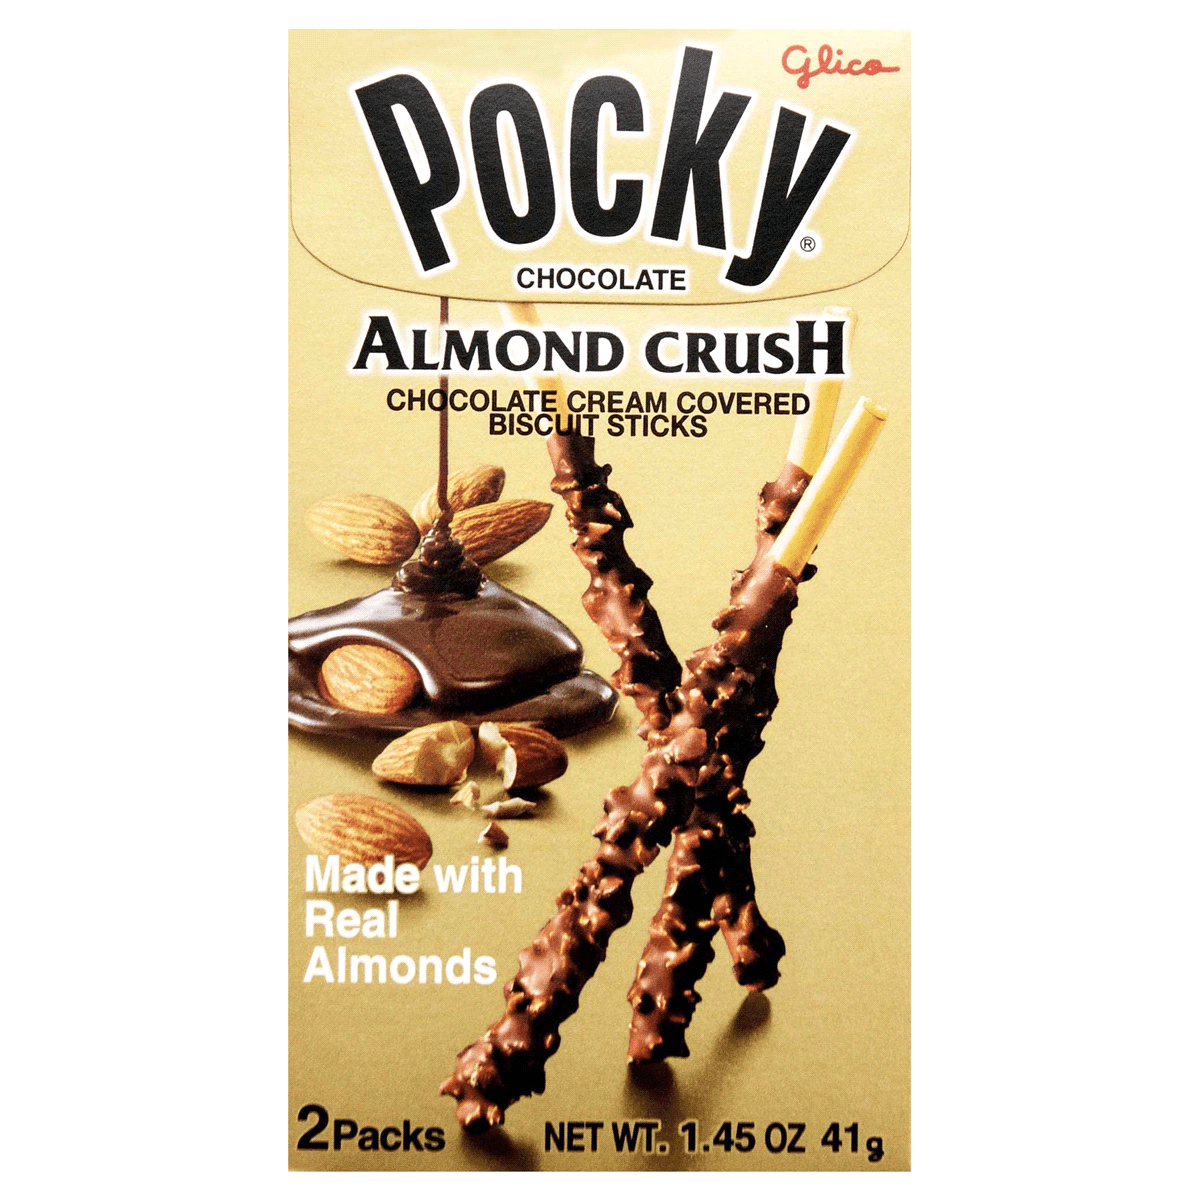 Pocky Biscuit Sticks, Chocolate Covered, Almond Crush - 3 packs, 1.37 oz